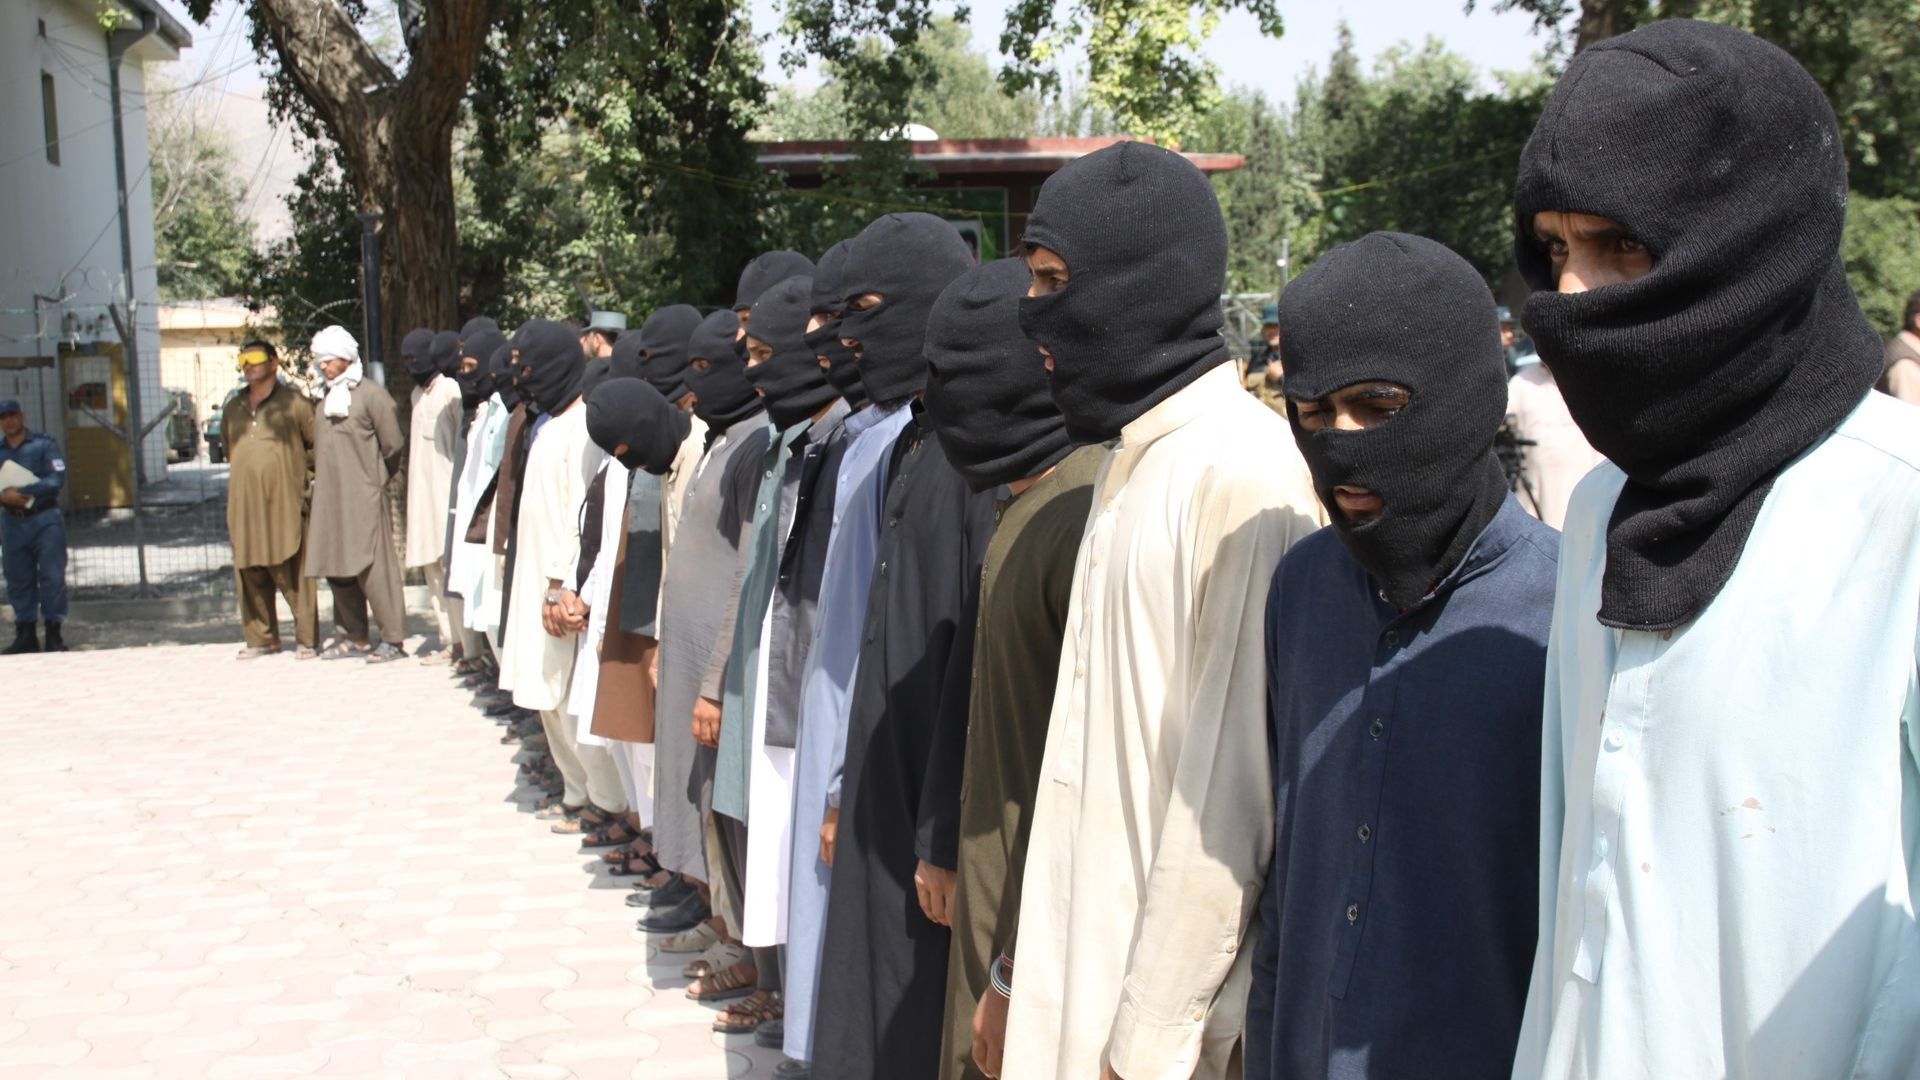 10 members of Daesh and 5 members of Taliban are seen unarmed as they captured by Afghan authorities.